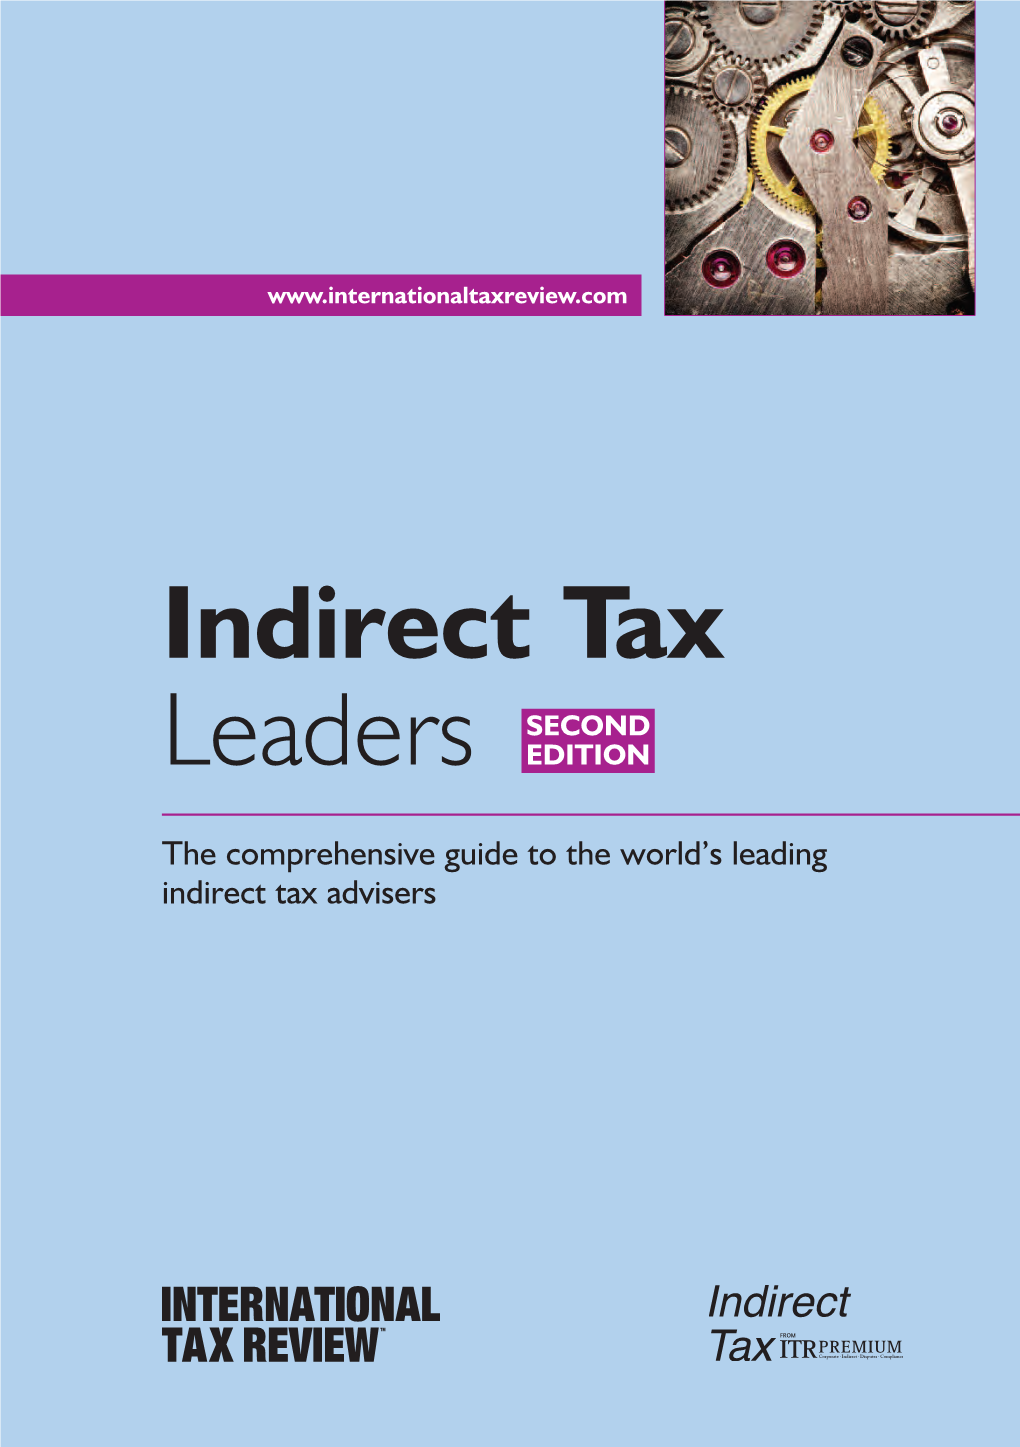 Indirect Tax Leaders Guide Last Year in Response to the Growing Methodology Importance of Indirect Taxation